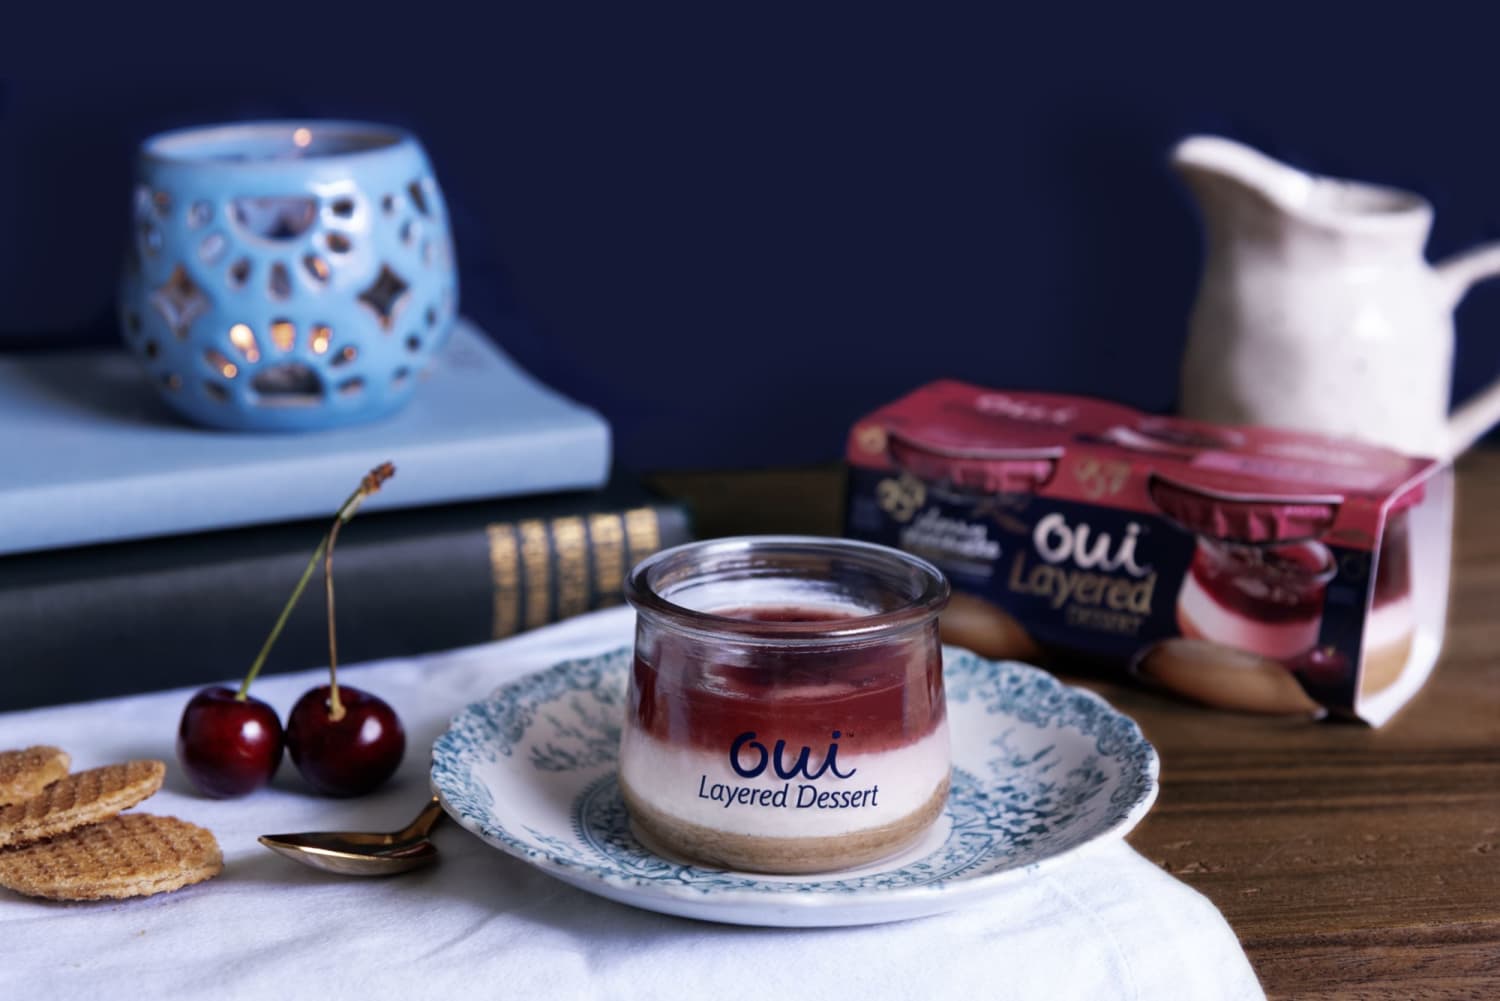 Oui Layered Desserts are the perfect me time sweet treat